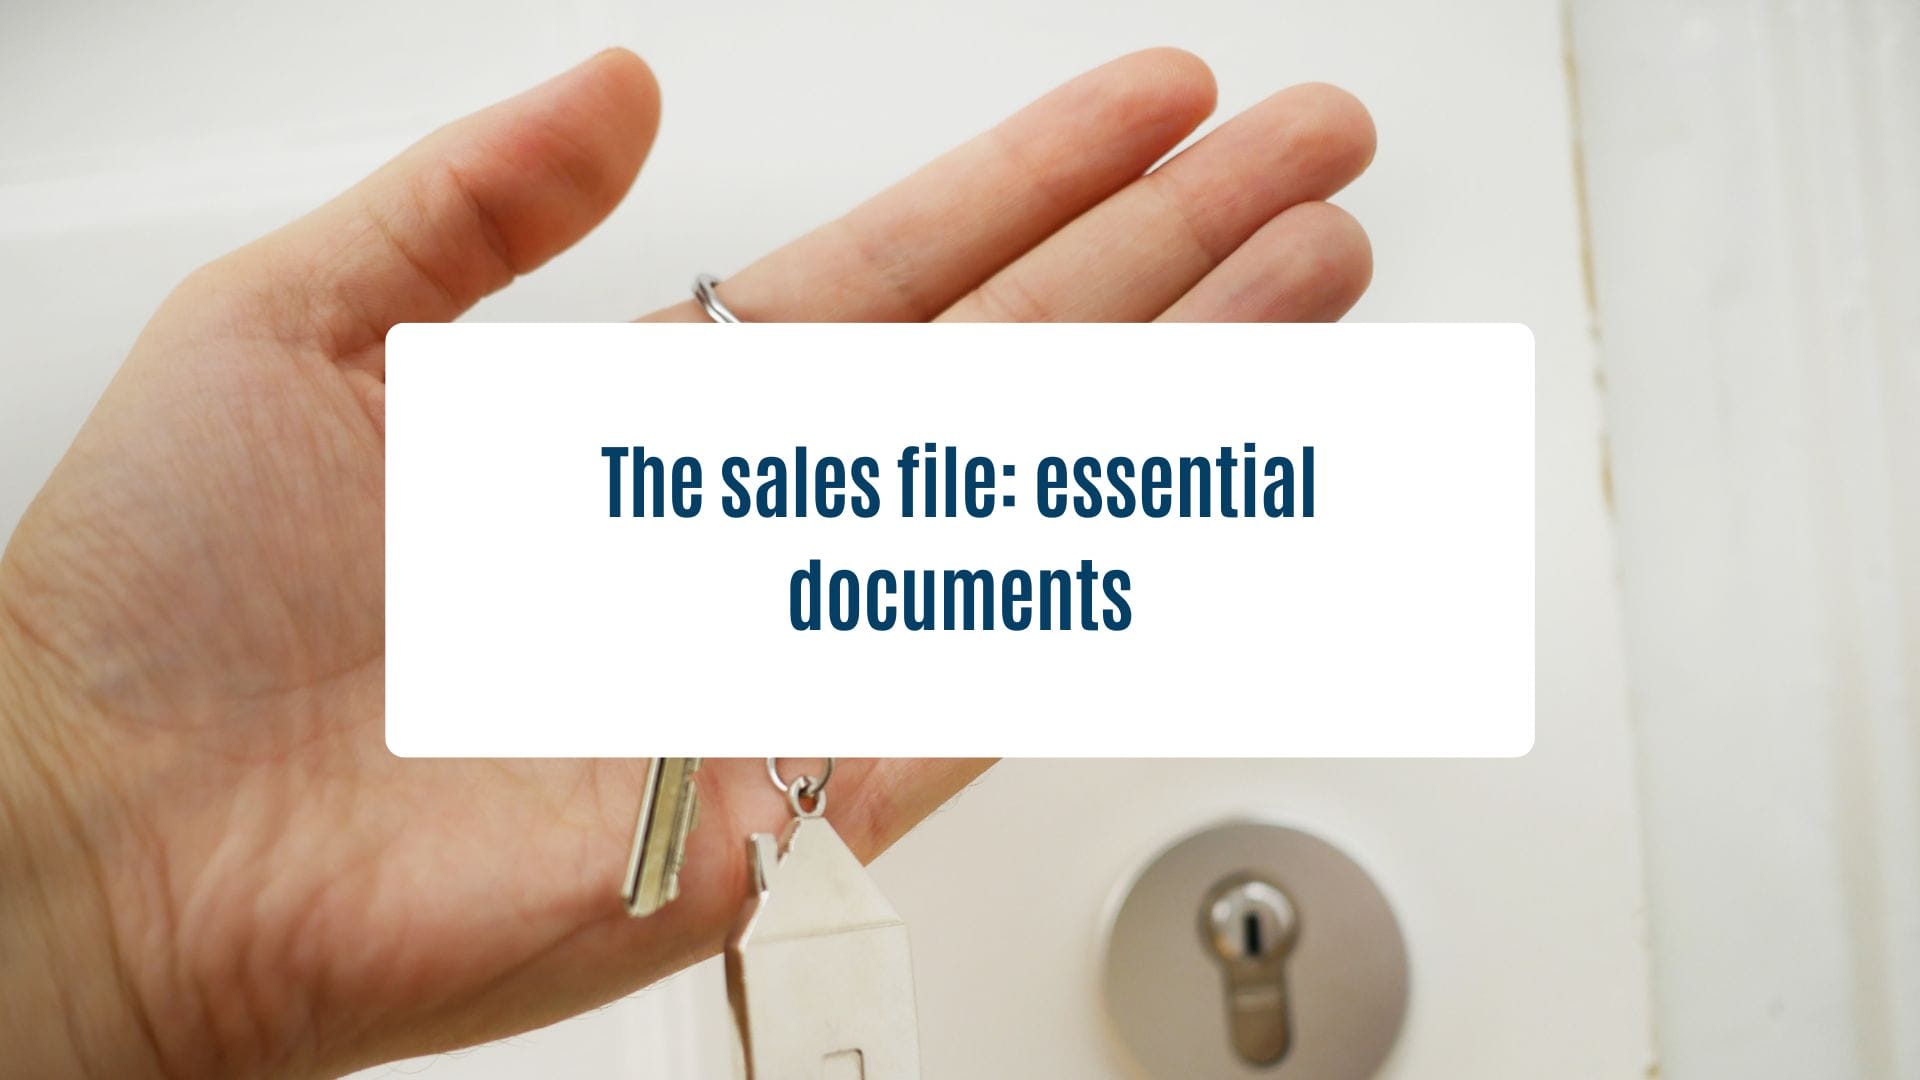 News Olam Properties - The sales file: essential documents